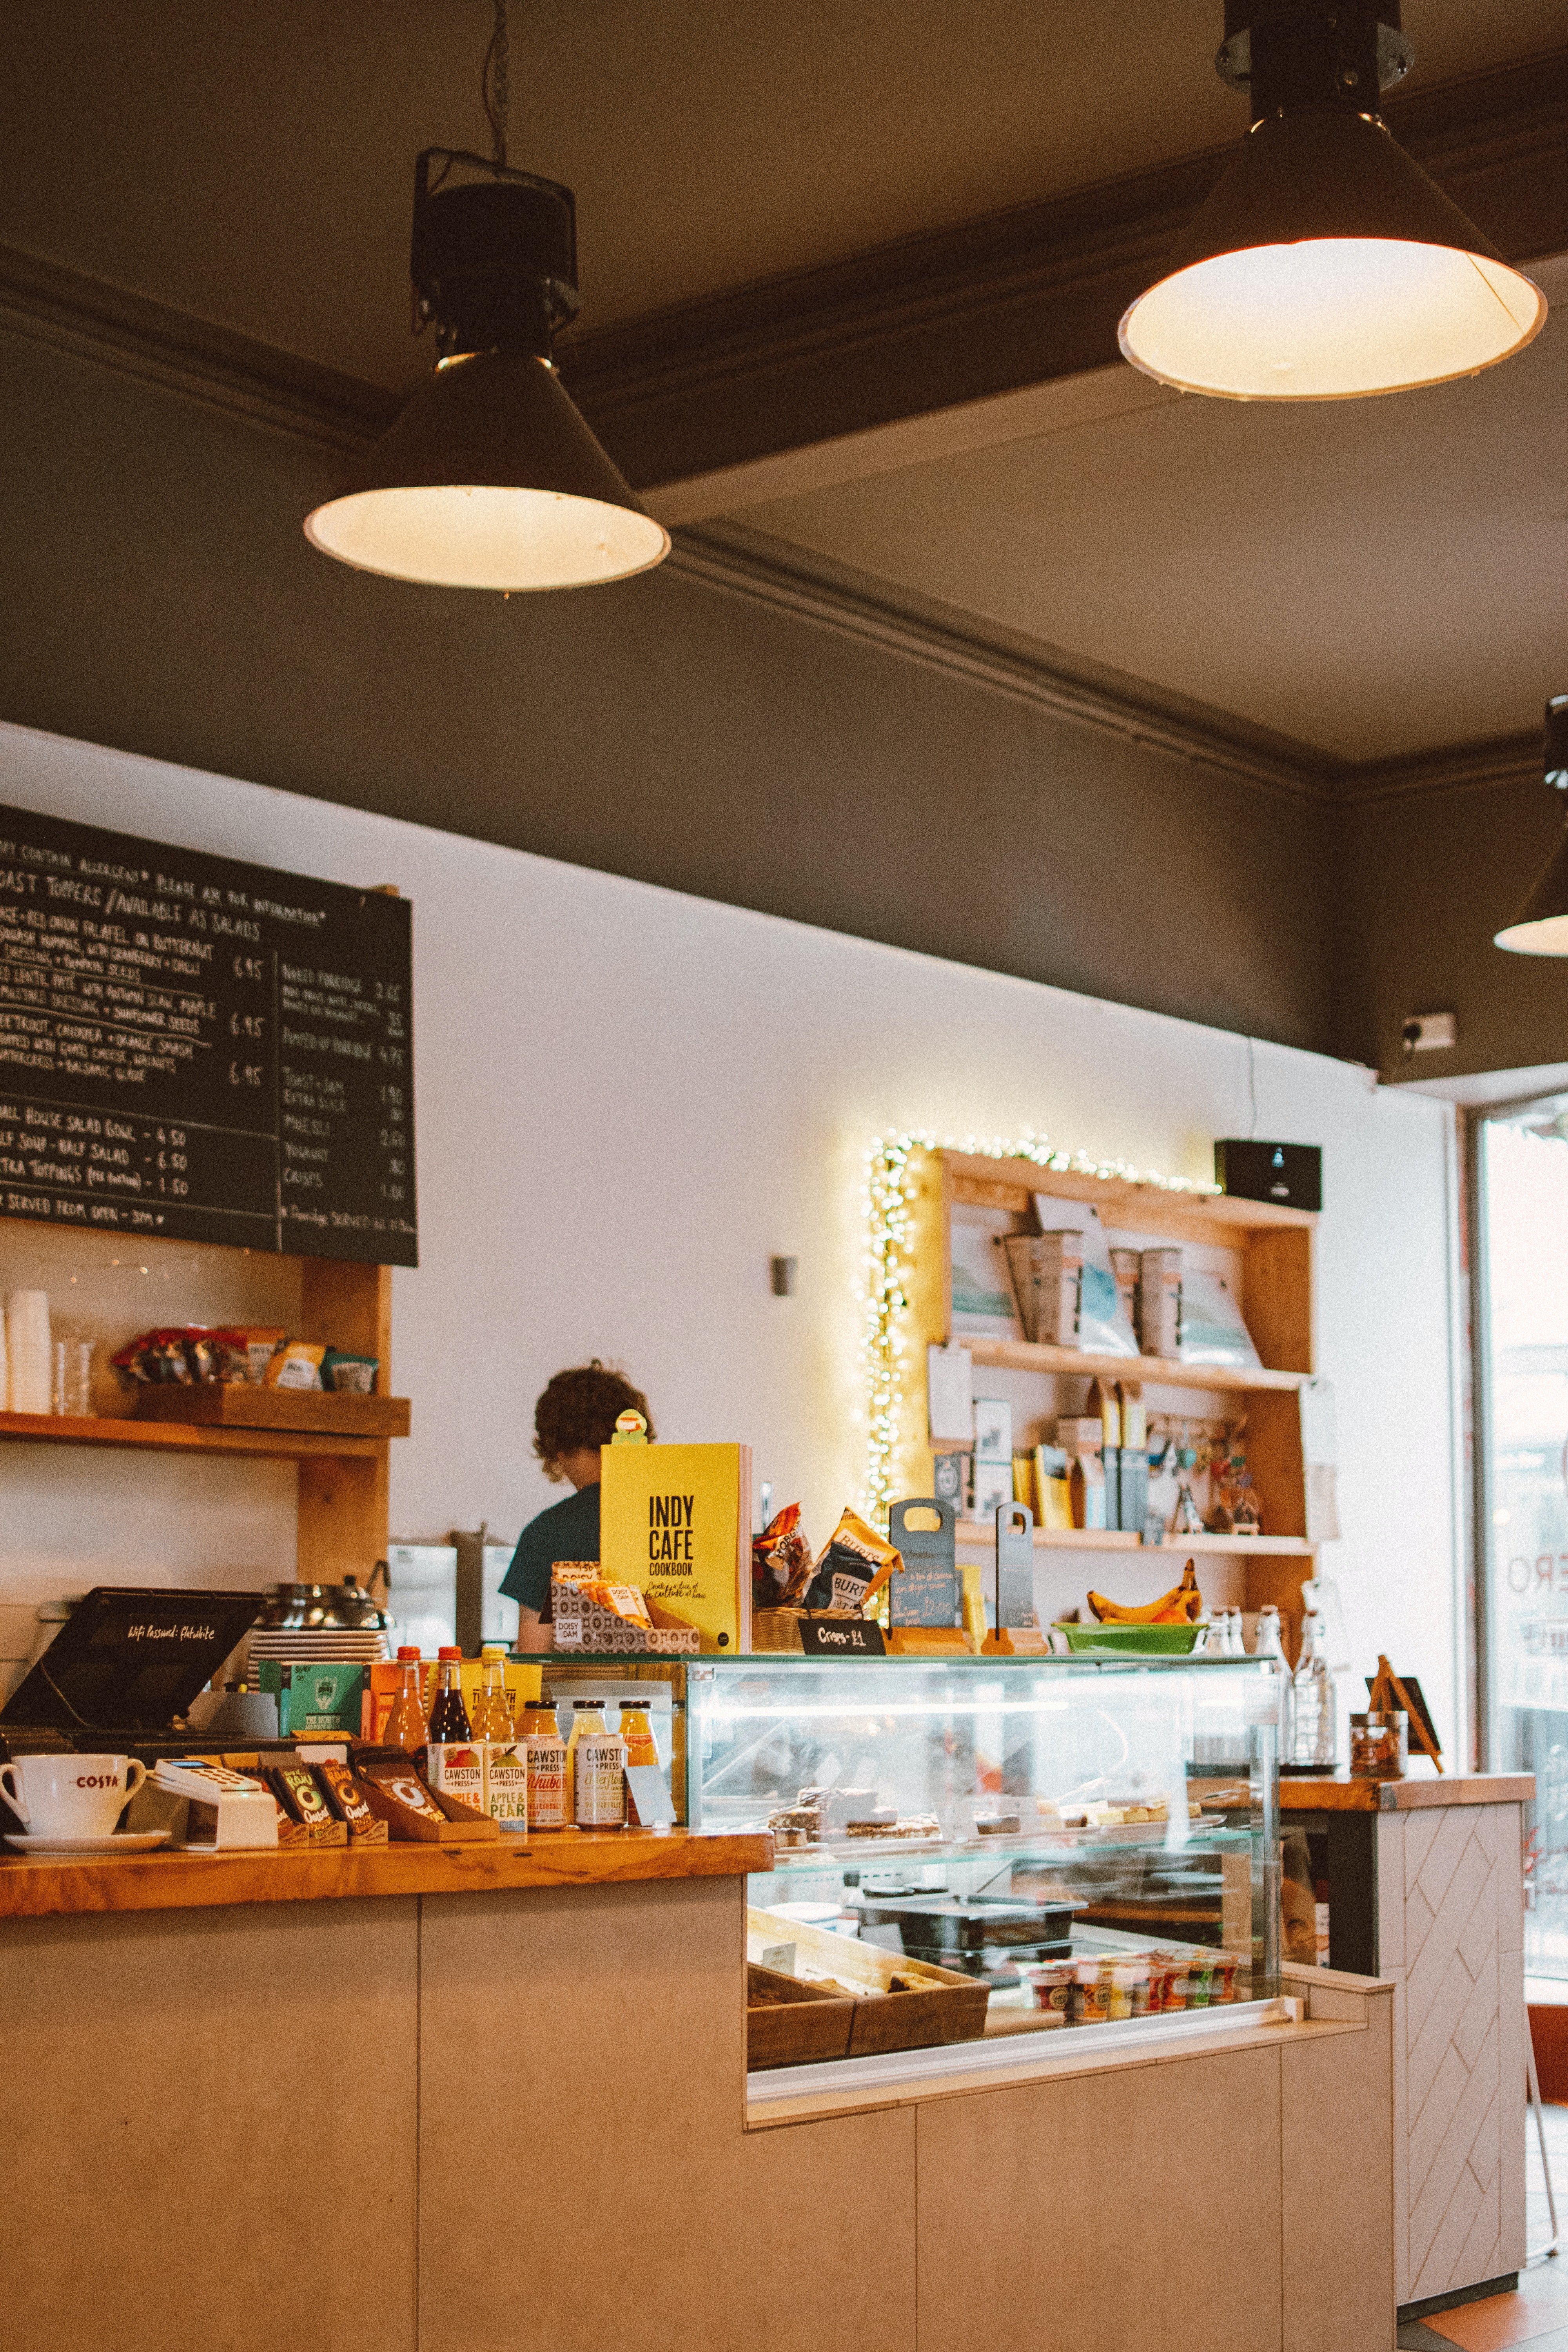 Evan worked double shifts at a cafe. | Source: Pexels